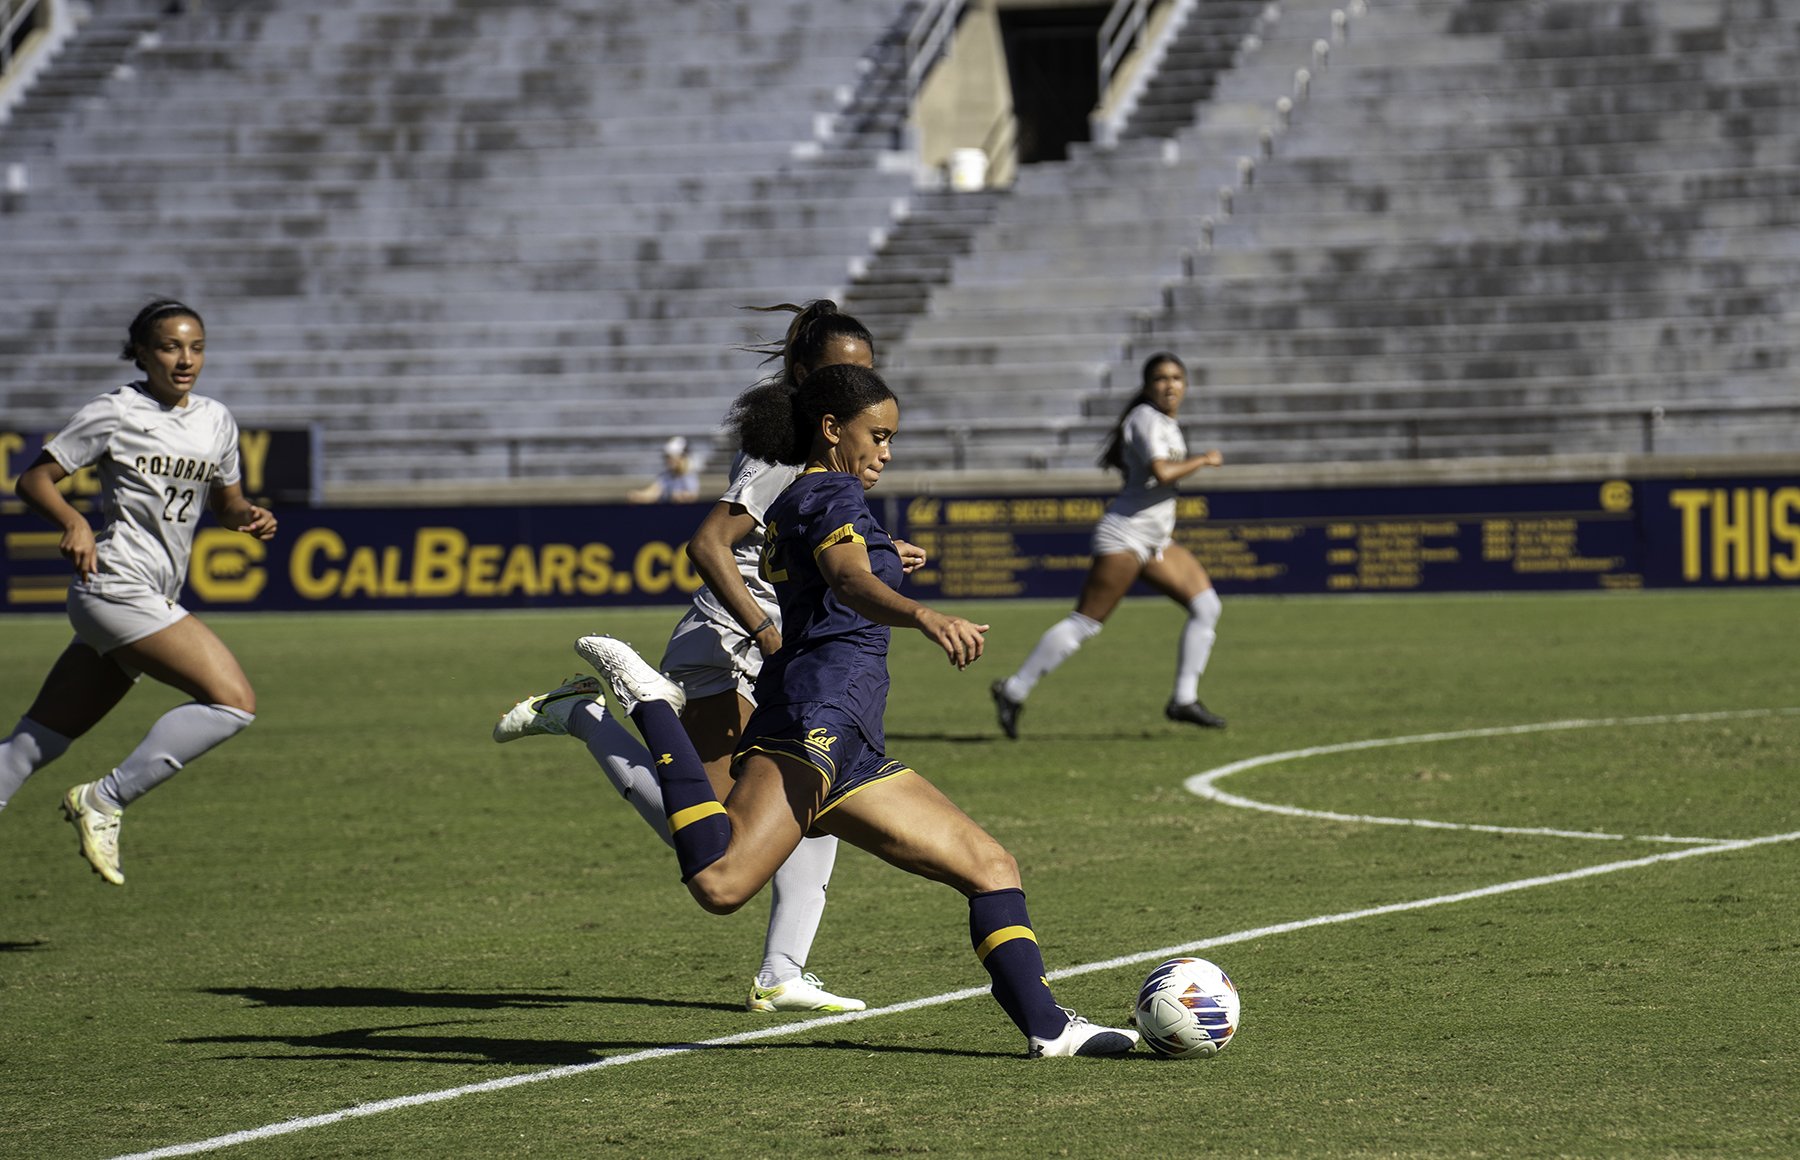 Get spooked! Bears destroy Buffs, draw with Utes